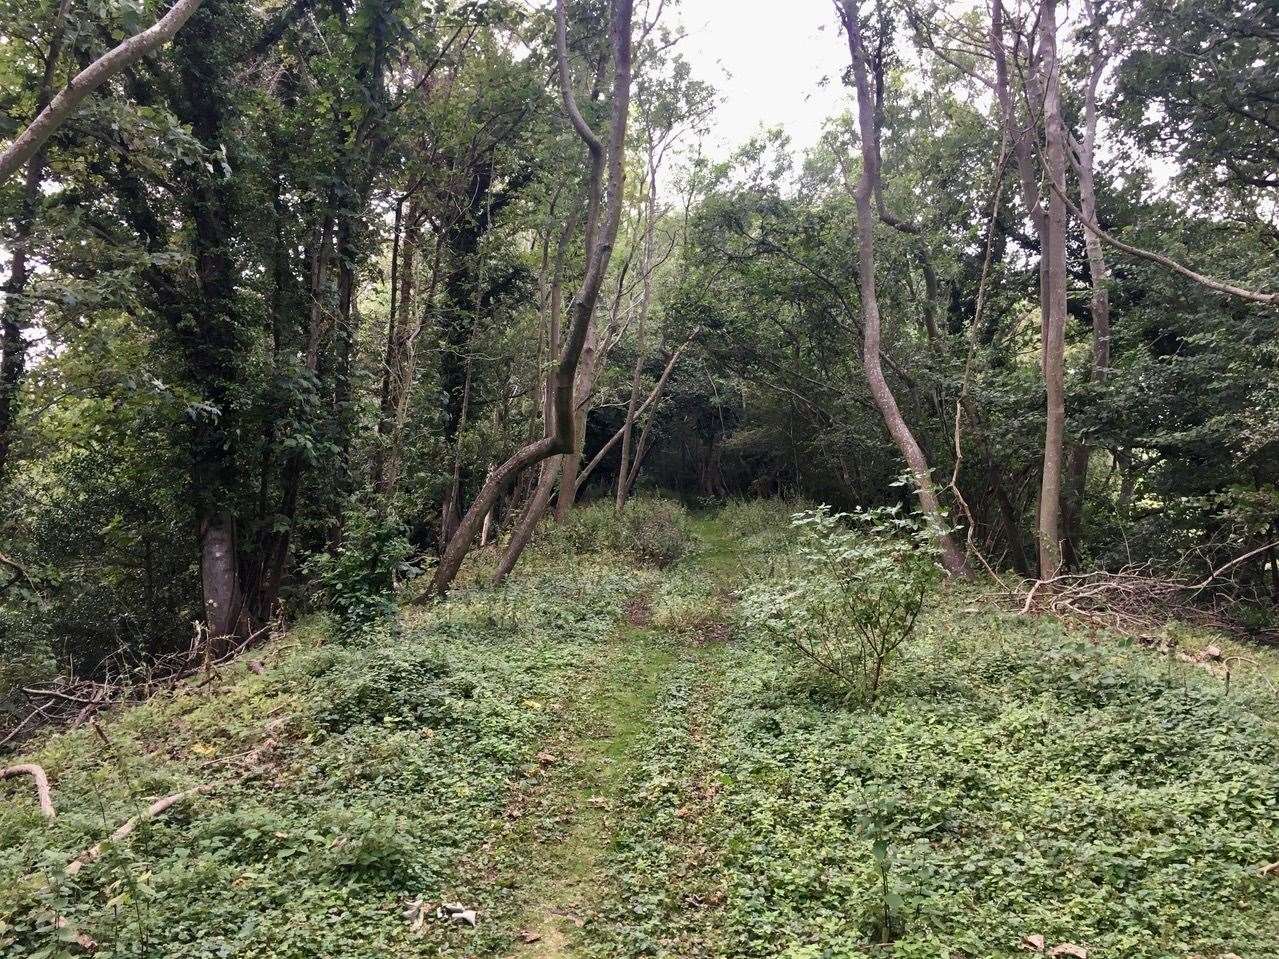 The woodland at Mill Leese surrounds part of the old railway embankment. Photo: Cllr Rory Love